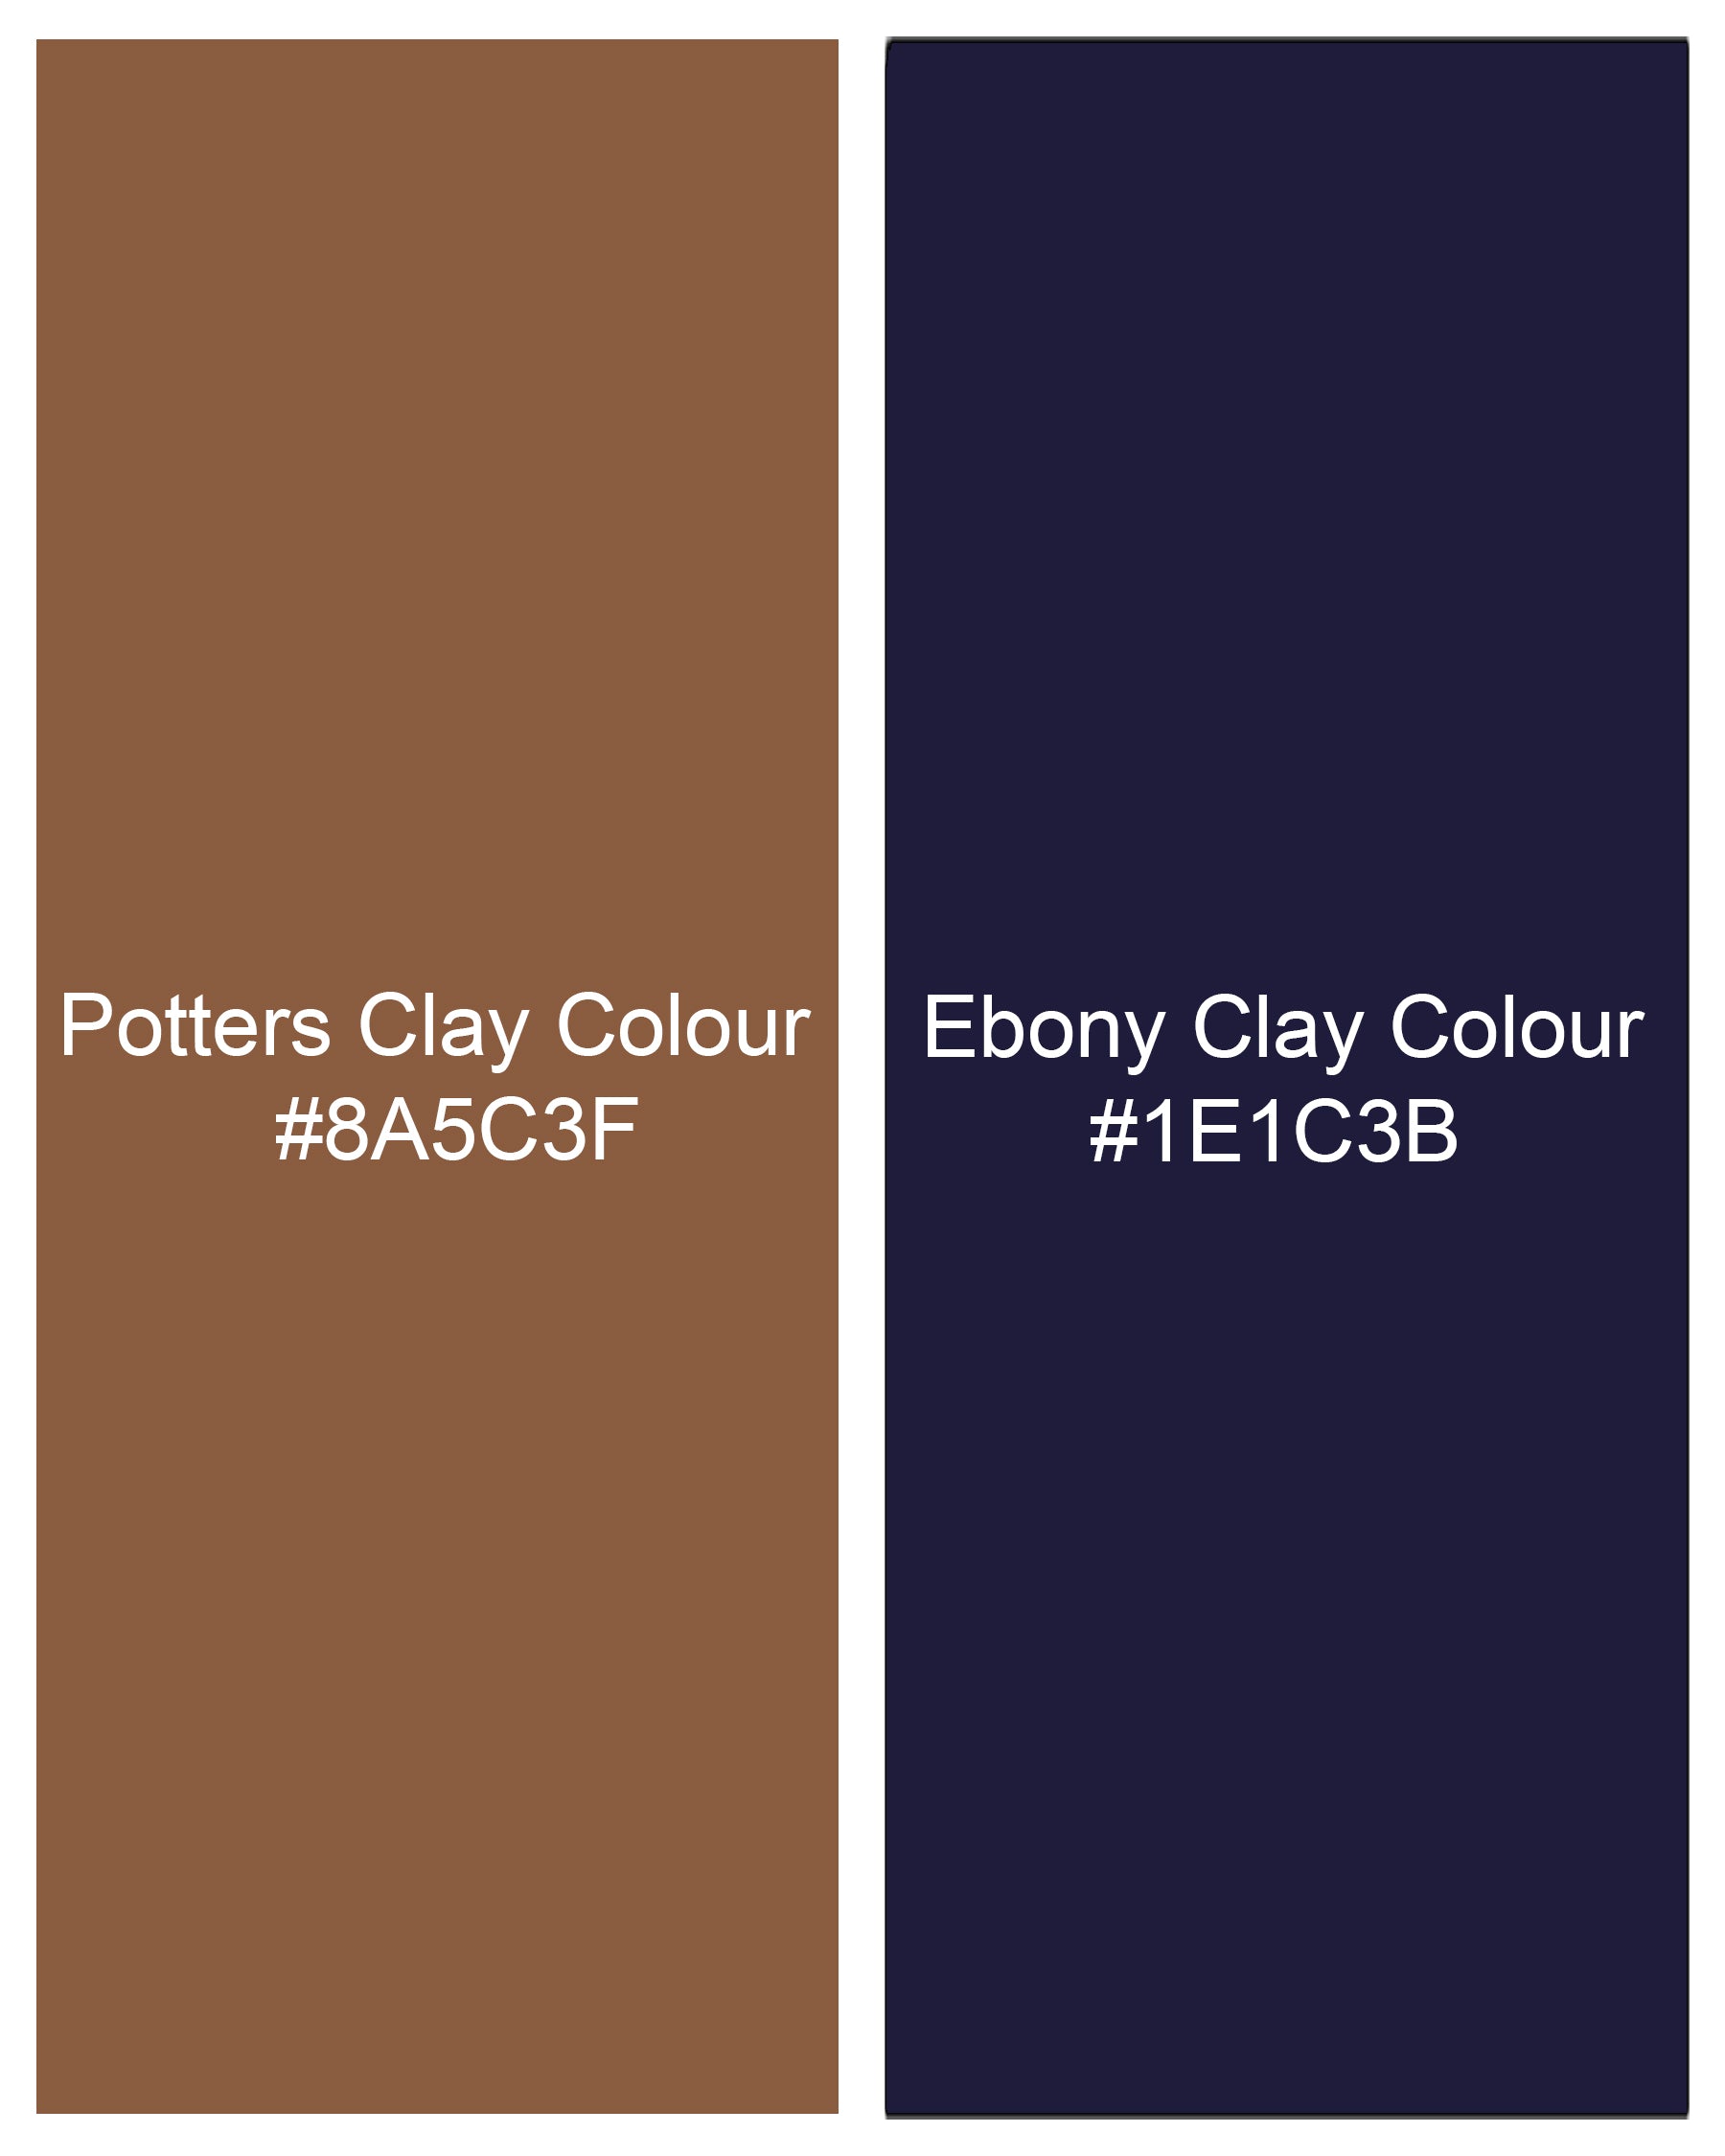 Potter Clay Brown with Ebony Clay Navy Blue Striped Dobby Textured Premium Giza Cotton Shirt 8097-BD-BLE-38, 8097-BD-BLE-H-38, 8097-BD-BLE-39, 8097-BD-BLE-H-39, 8097-BD-BLE-40, 8097-BD-BLE-H-40, 8097-BD-BLE-42, 8097-BD-BLE-H-42, 8097-BD-BLE-44, 8097-BD-BLE-H-44, 8097-BD-BLE-46, 8097-BD-BLE-H-46, 8097-BD-BLE-48, 8097-BD-BLE-H-48, 8097-BD-BLE-50, 8097-BD-BLE-H-50, 8097-BD-BLE-52, 8097-BD-BLE-H-52